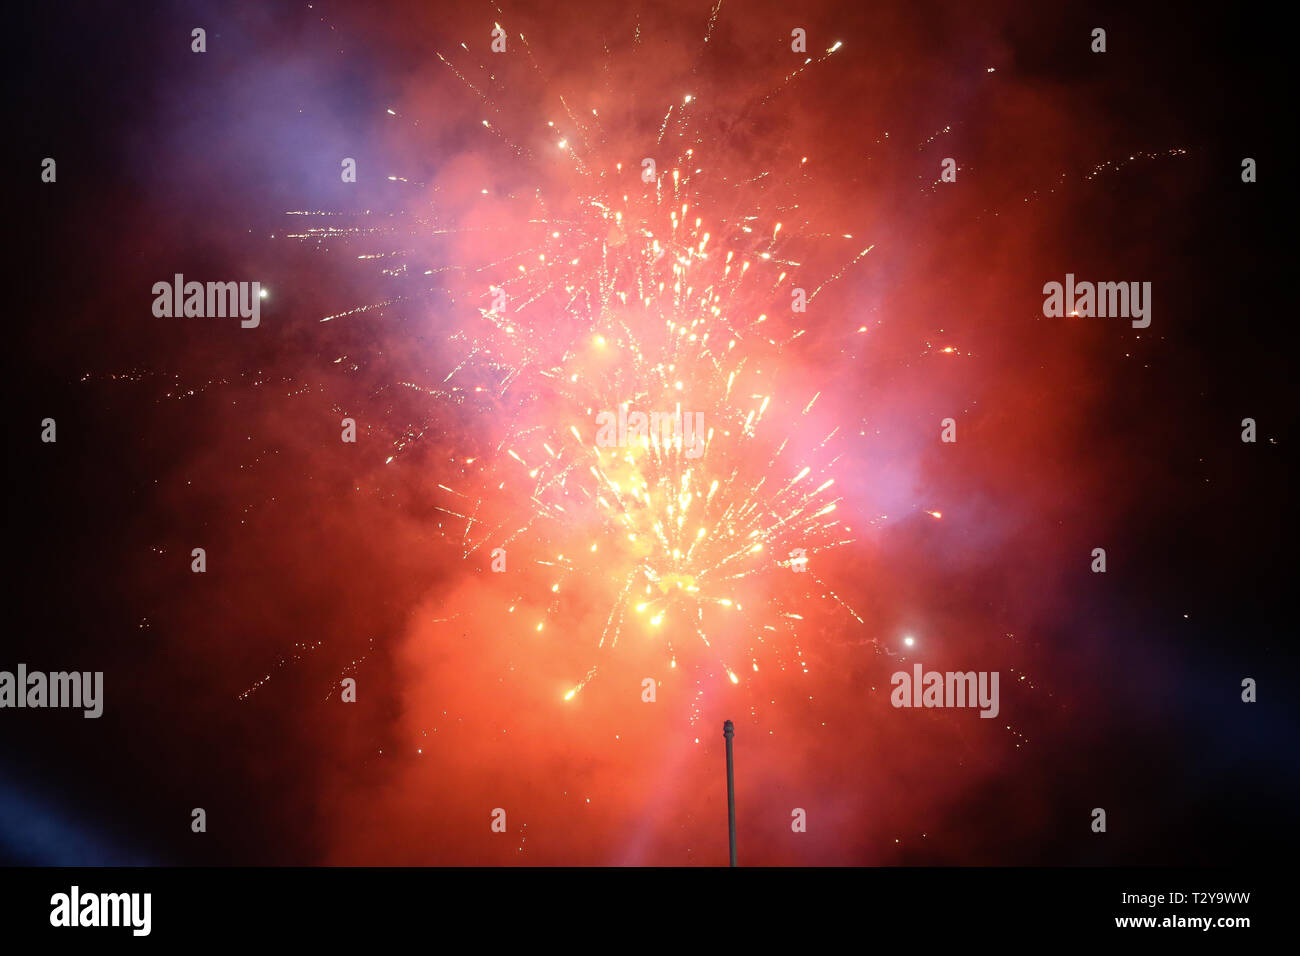 Fireworks Stage LIghting Colorful Stock Photo